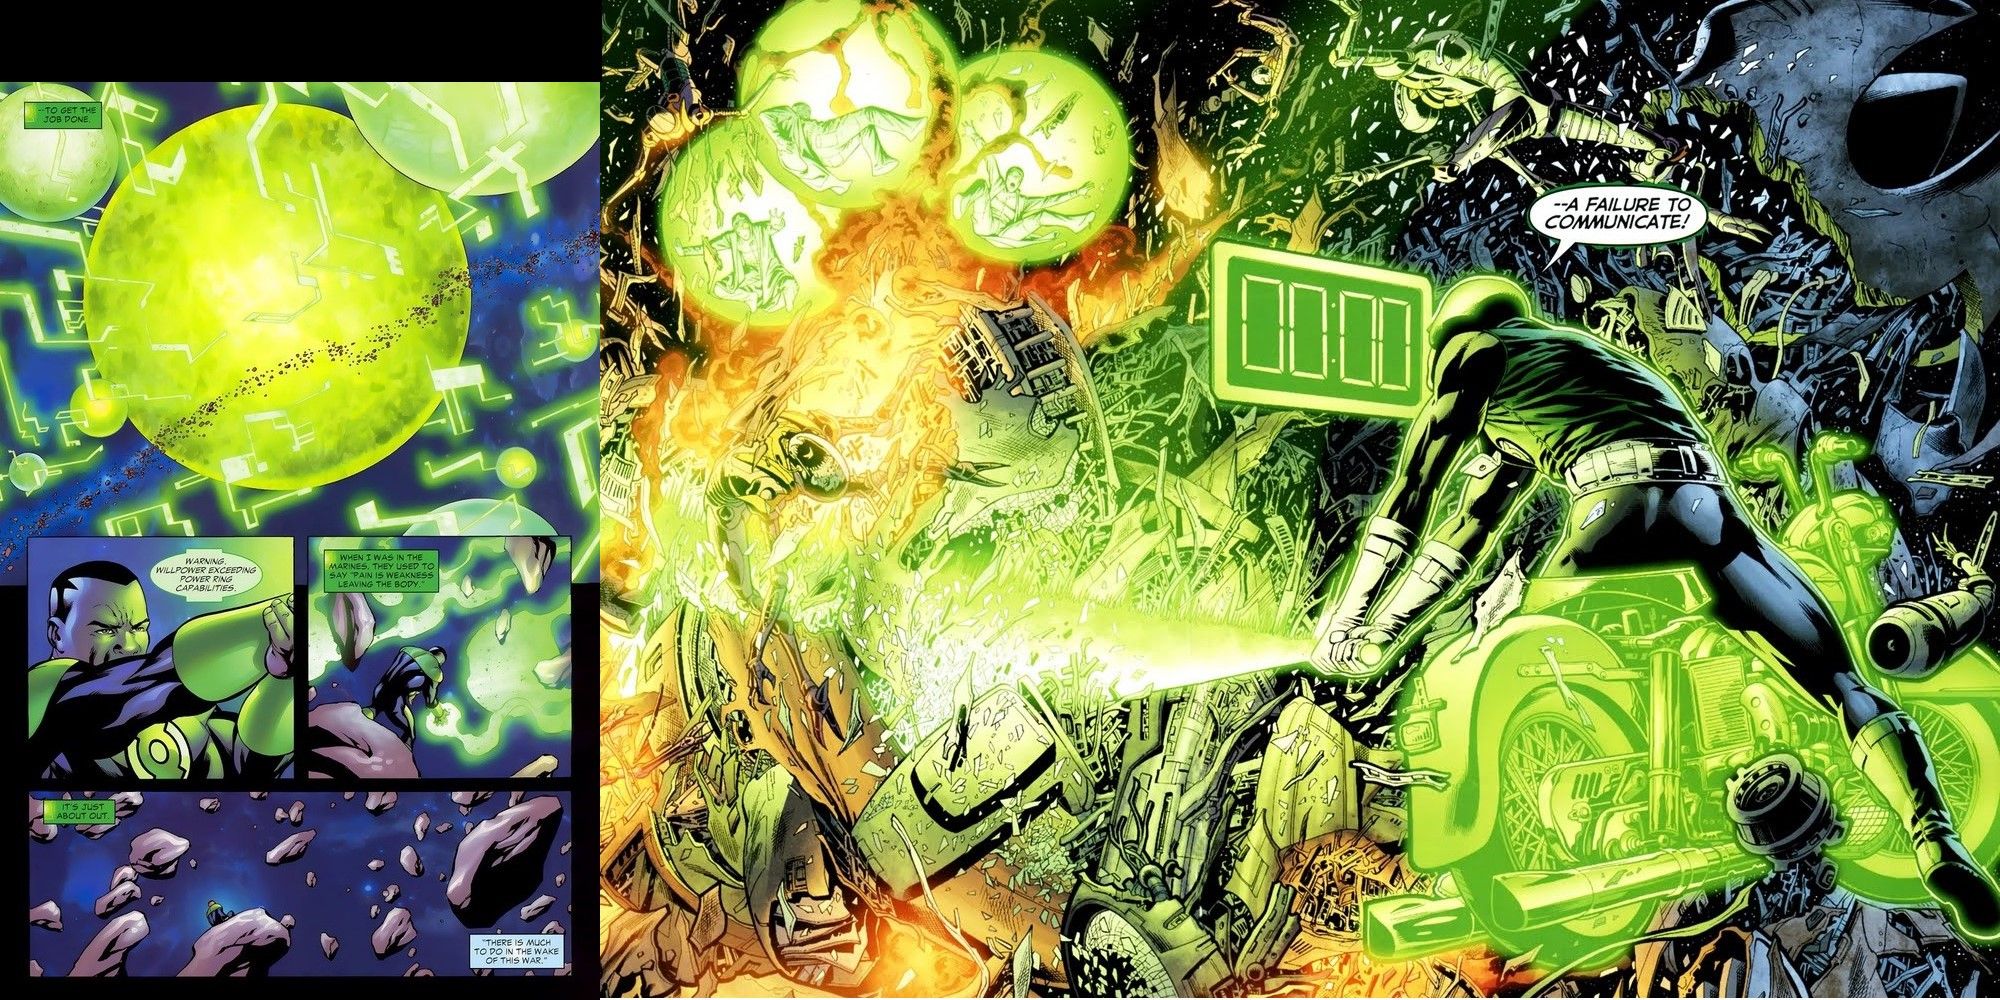 Green Lantern recreated an entire Solar system because of his guilt